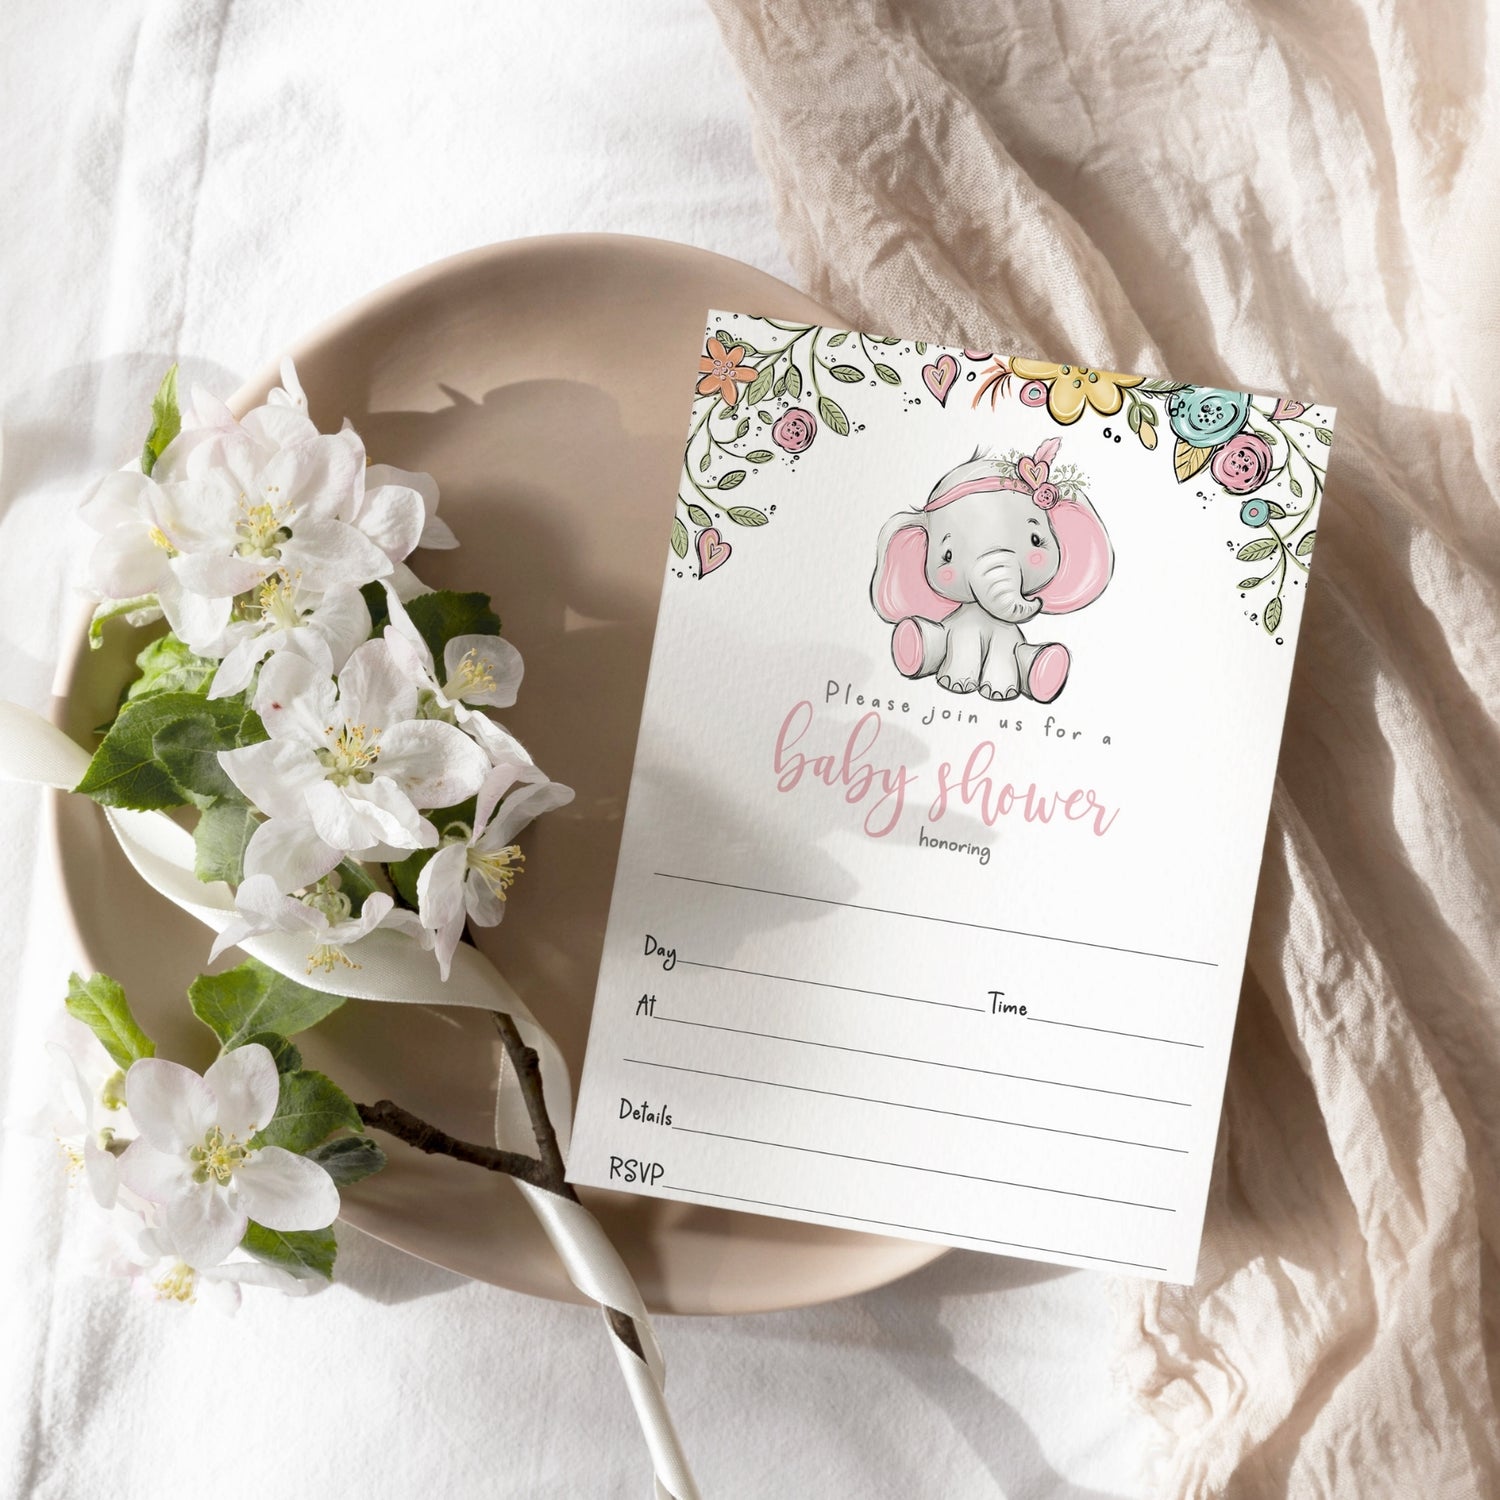 Discover the perfect blend of charm and whimsy with our Cute Rustic Floral and Pink Elephant Baby Shower Party Supplies